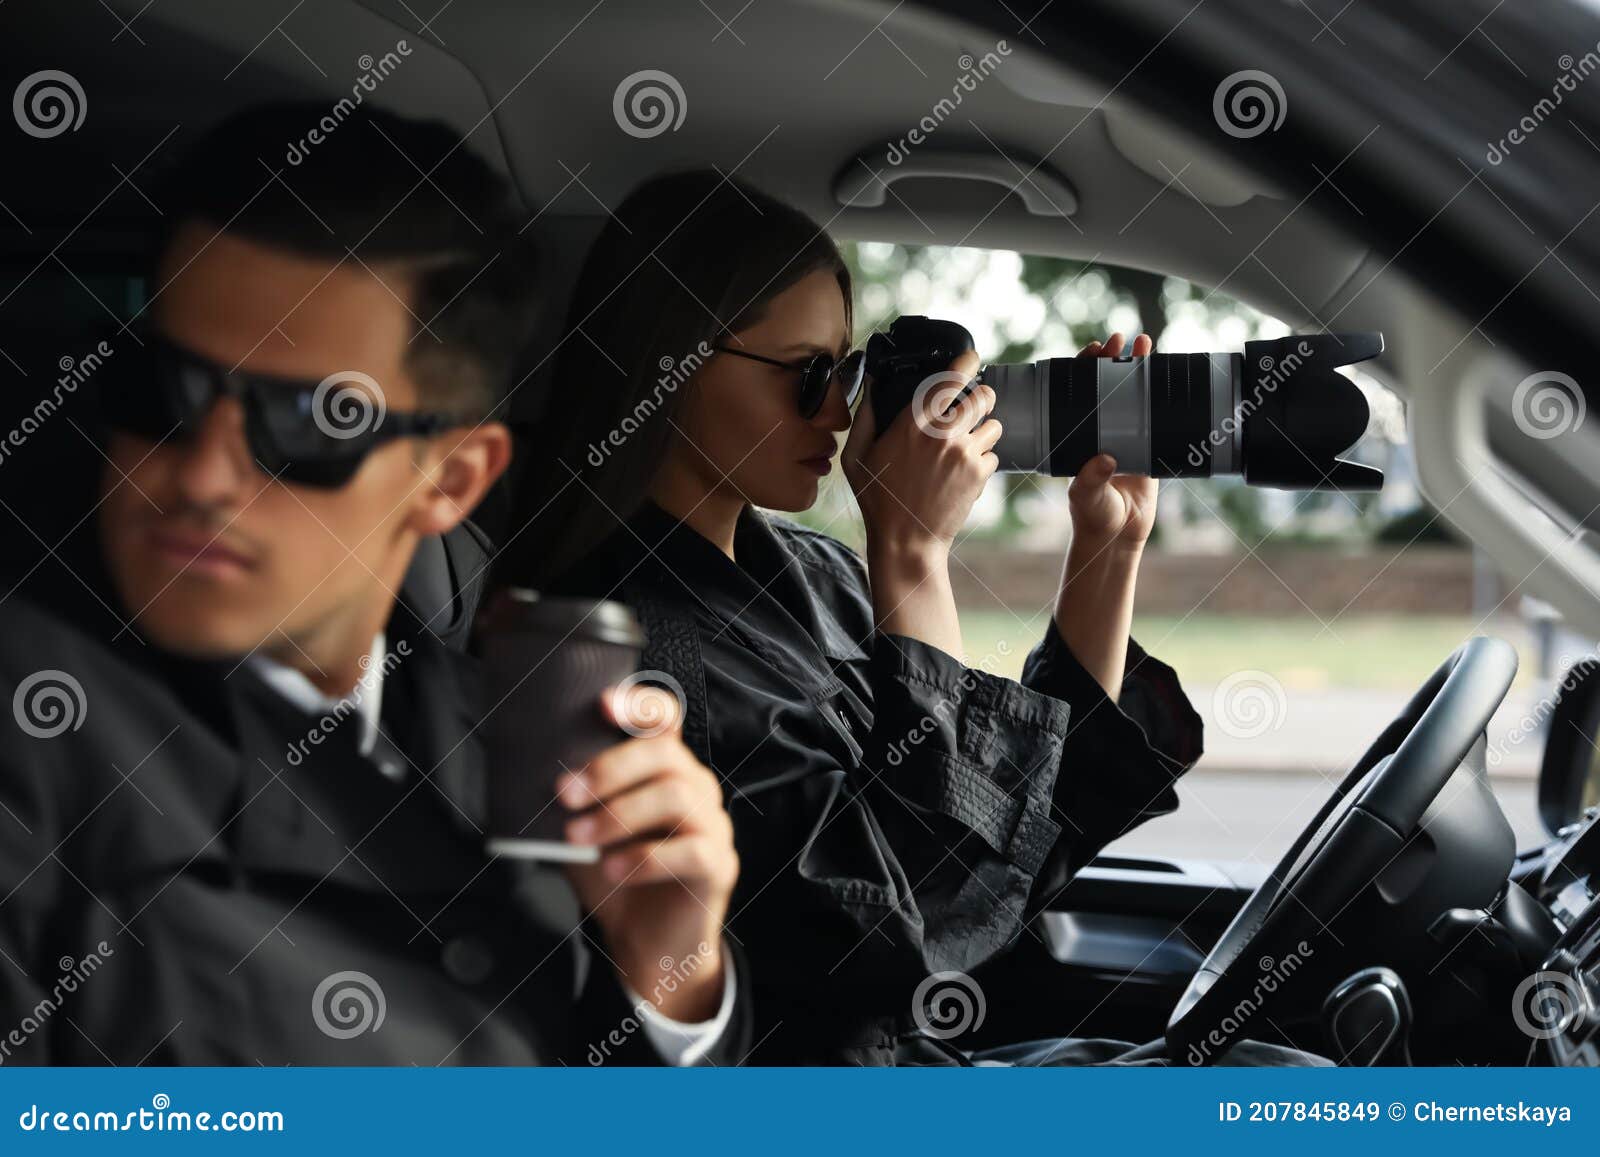 private detectives with modern camera spying from car